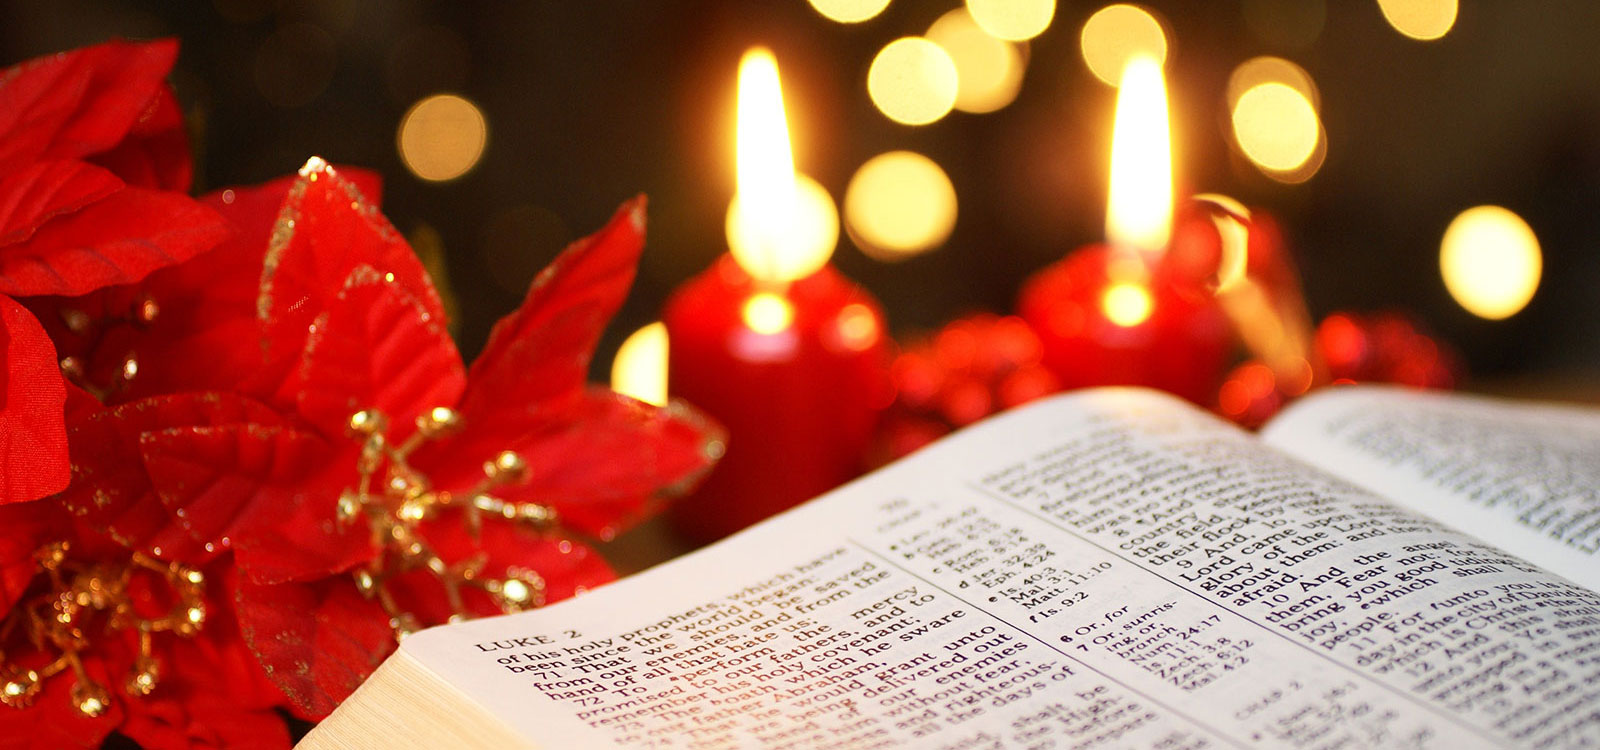 Experience the joy of Christmas with daily advent readings